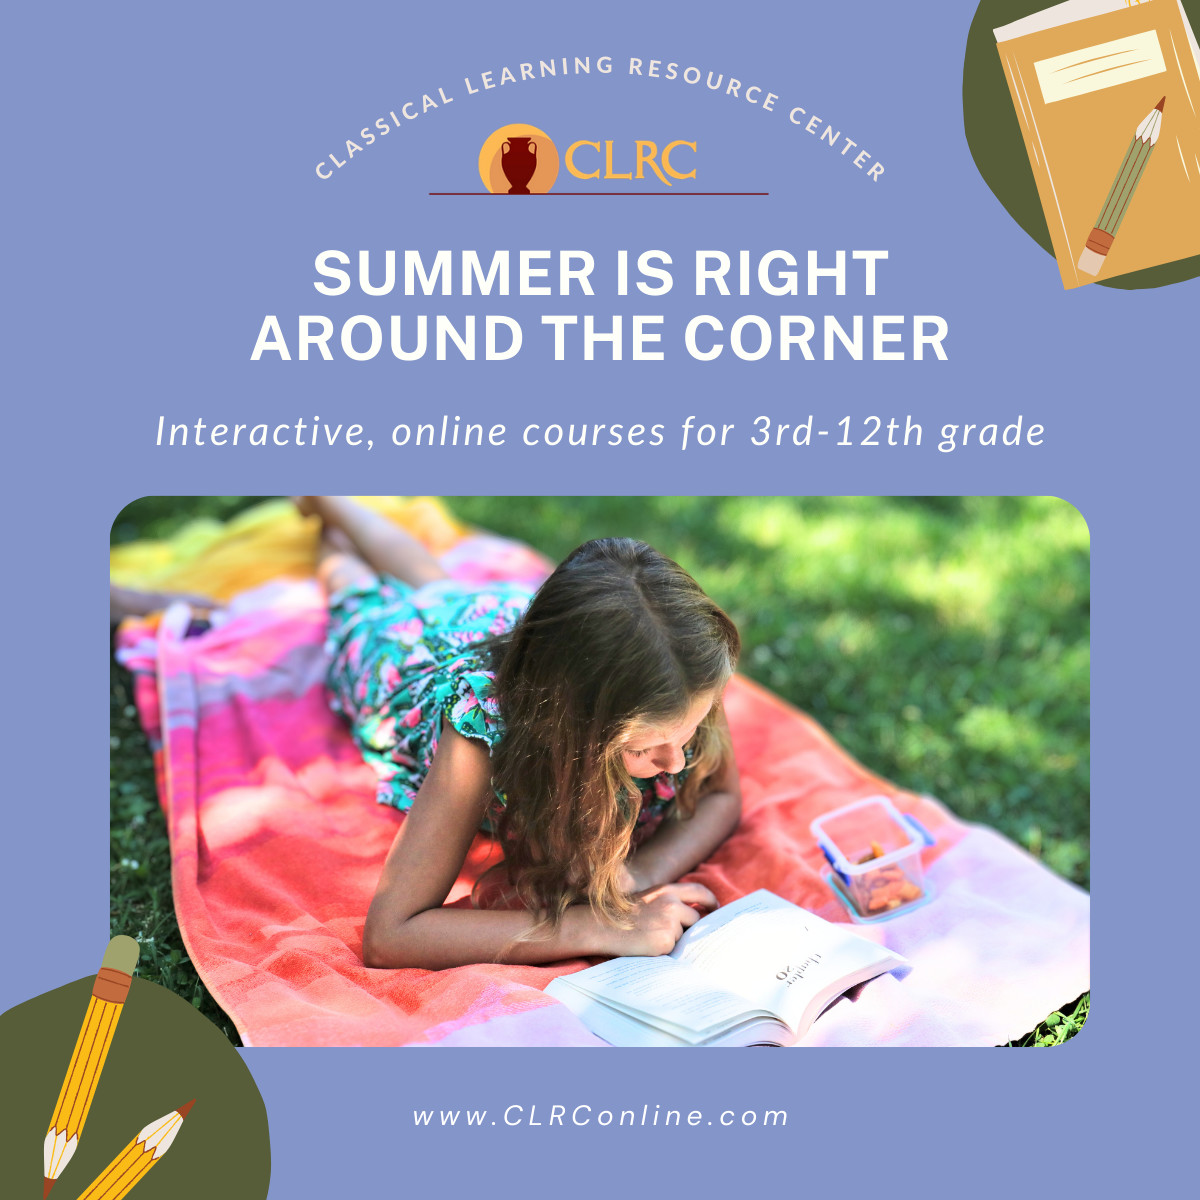 CLRC Summer Registration is Open! CLRC Summer classes provide a wonderful opportunity to explore special interests, try new things, and have a lot of fun! #summeronlineclasses #summermath #summerhighschoolcredit